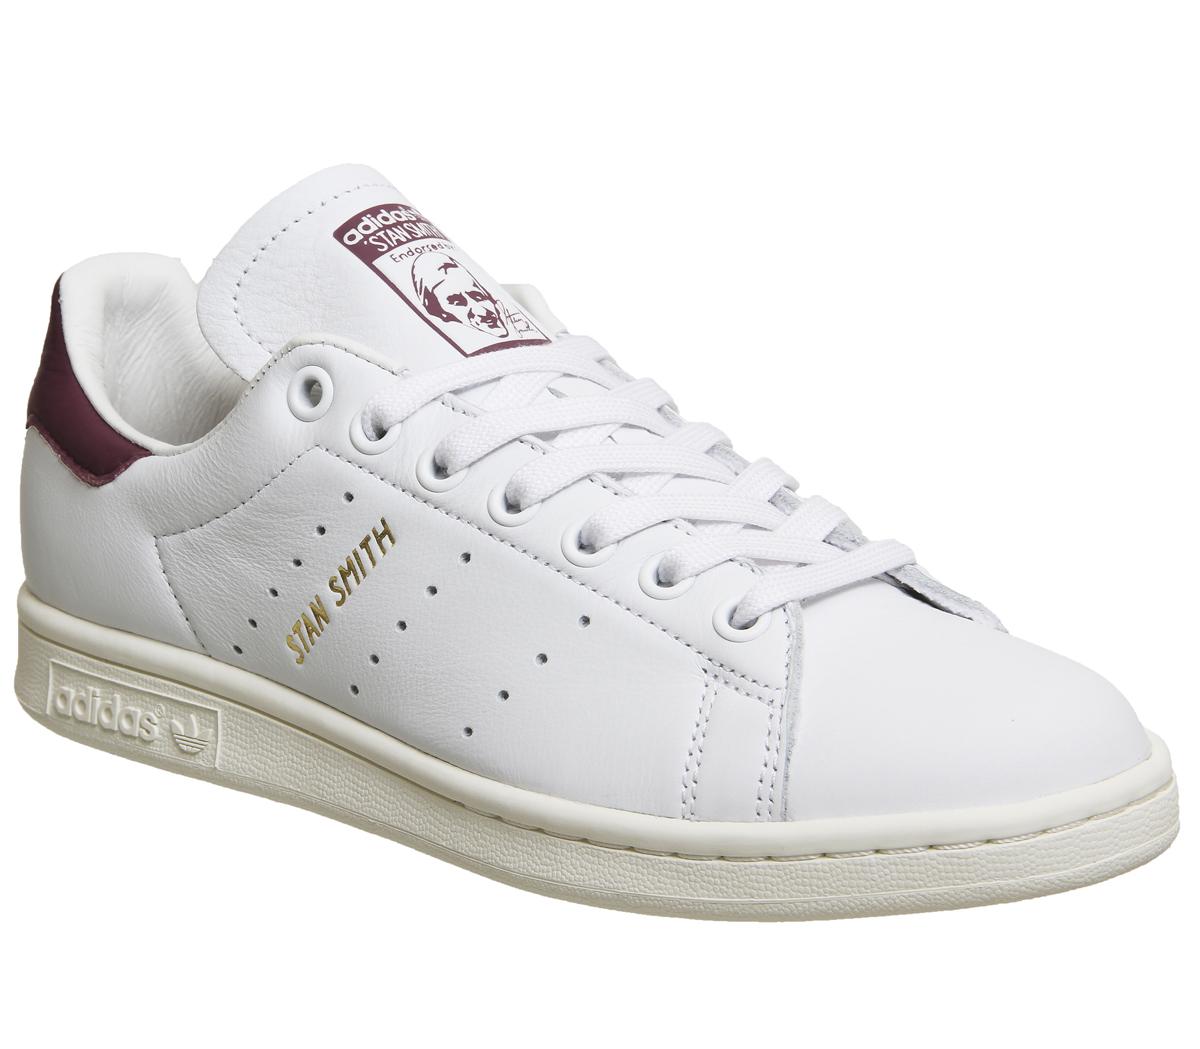 stan smith trainers uk